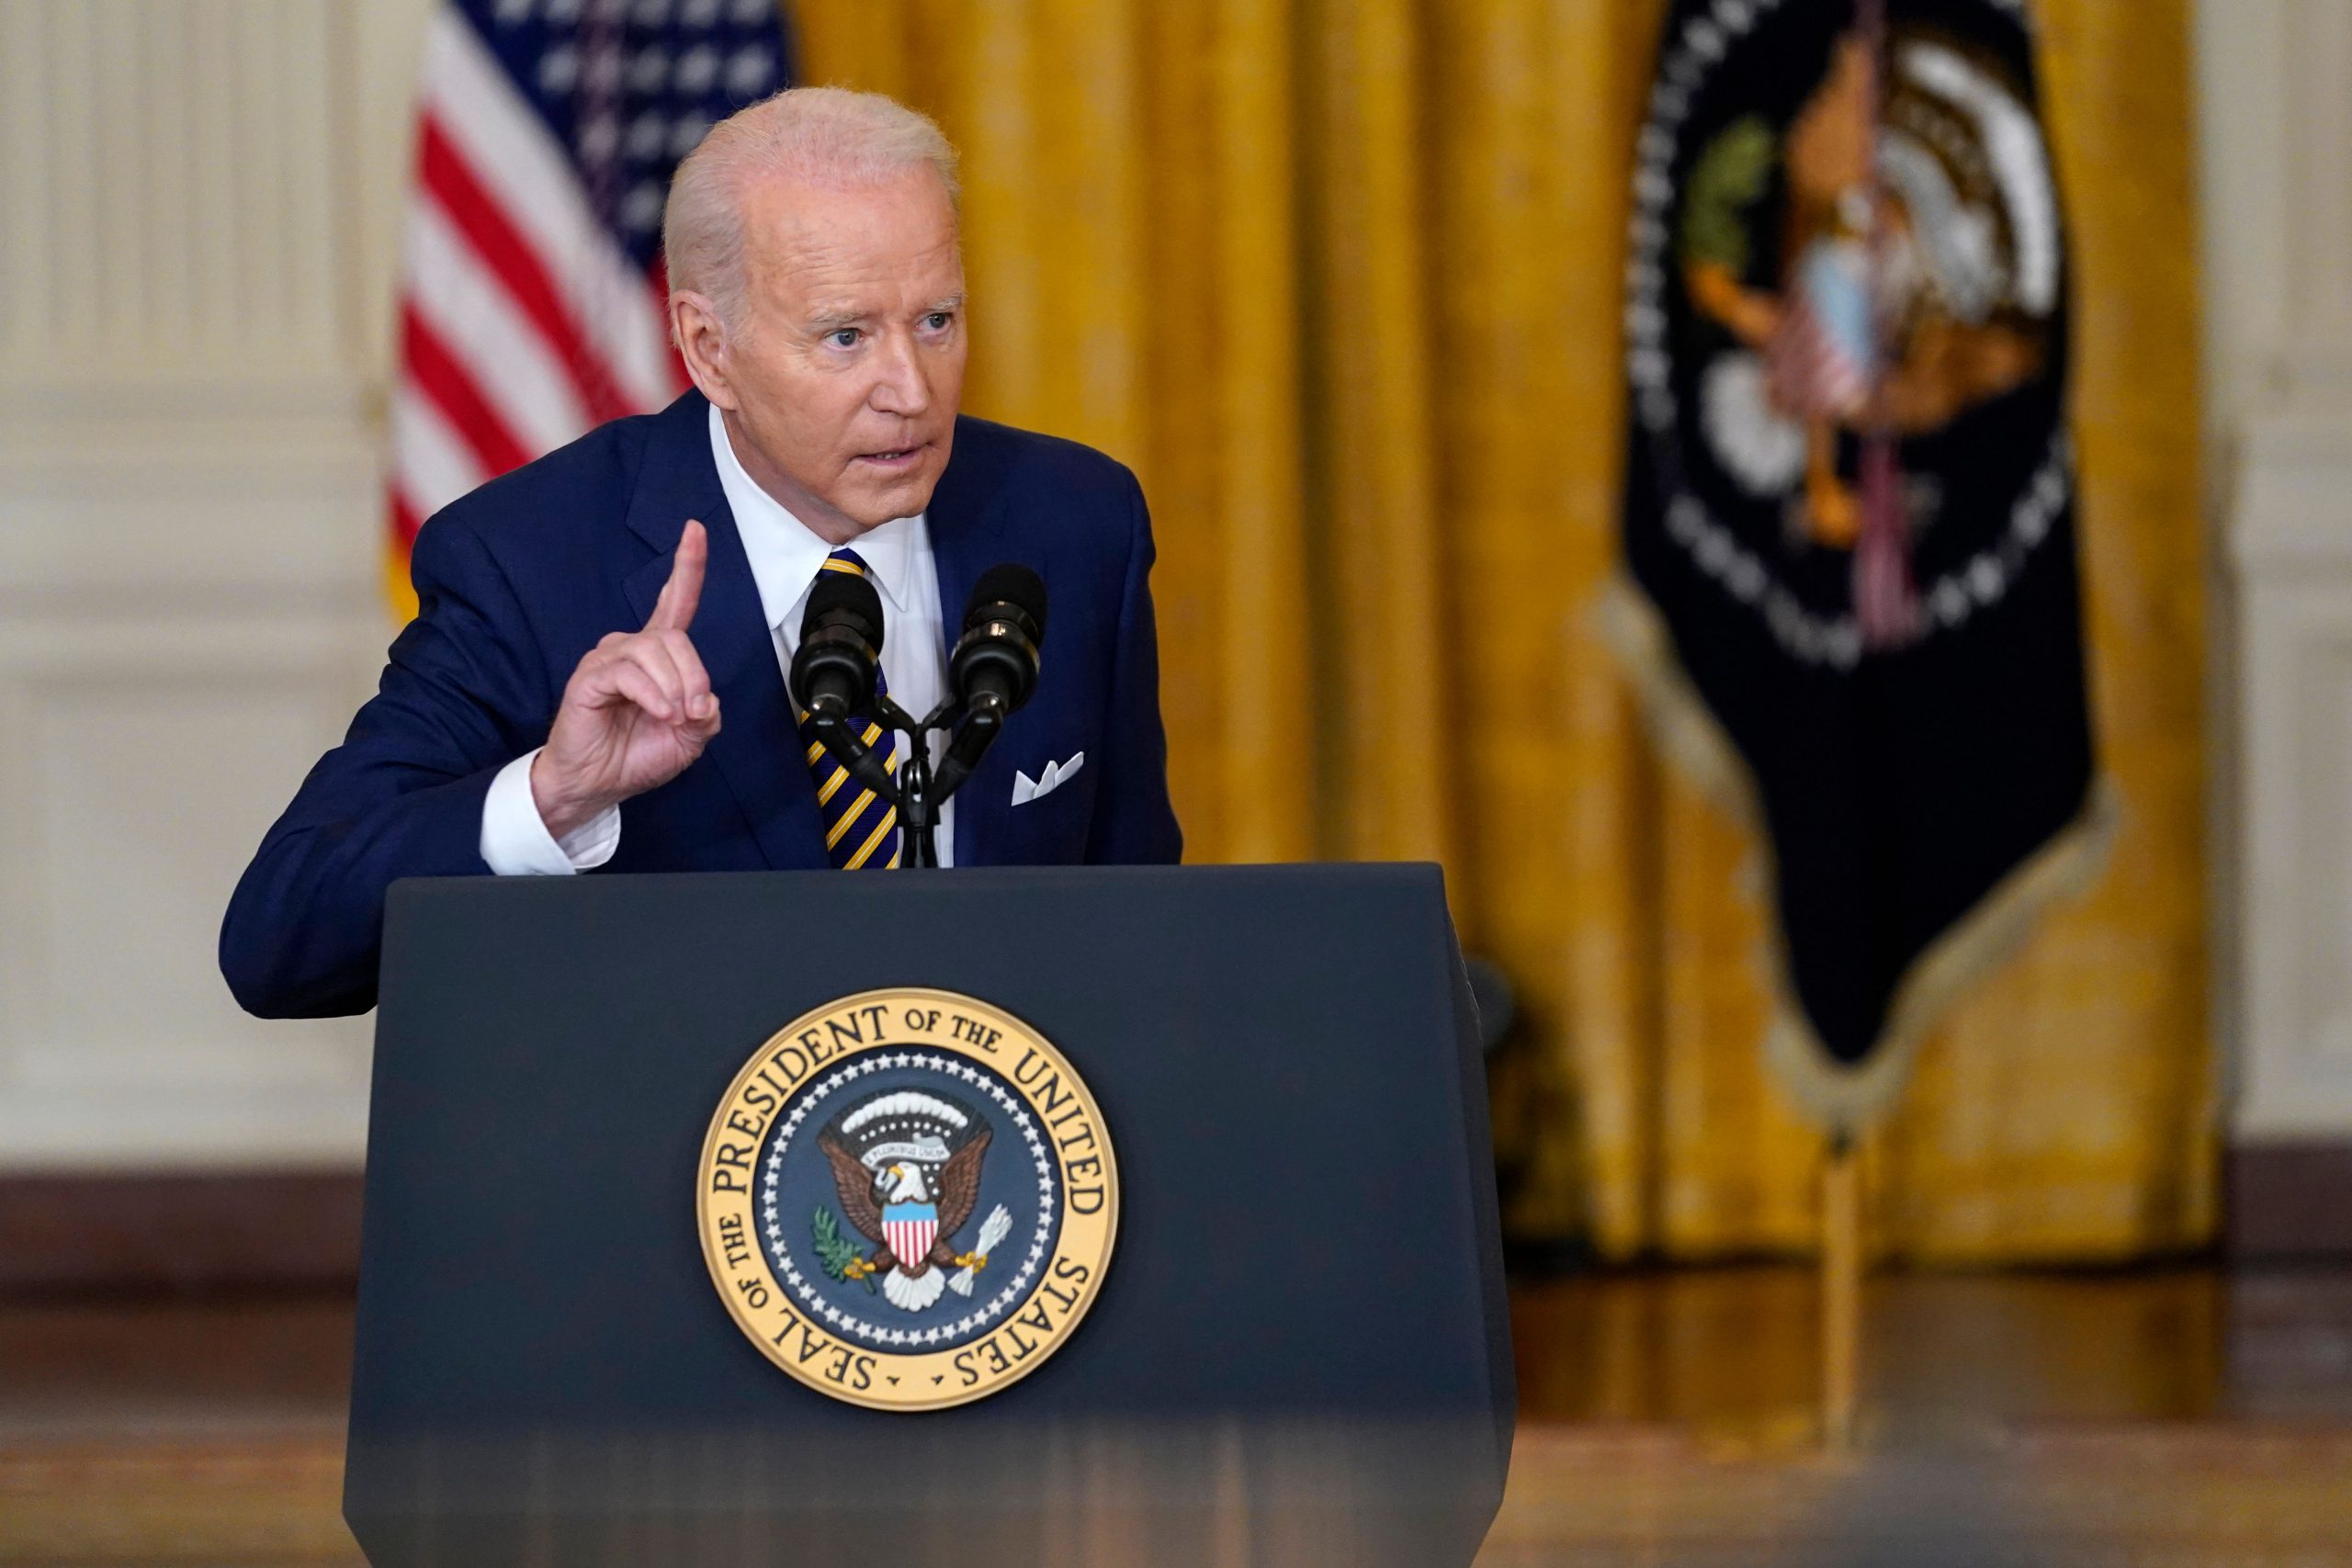 One year of Joe Biden: US President spent more time on personal travel than predecessors